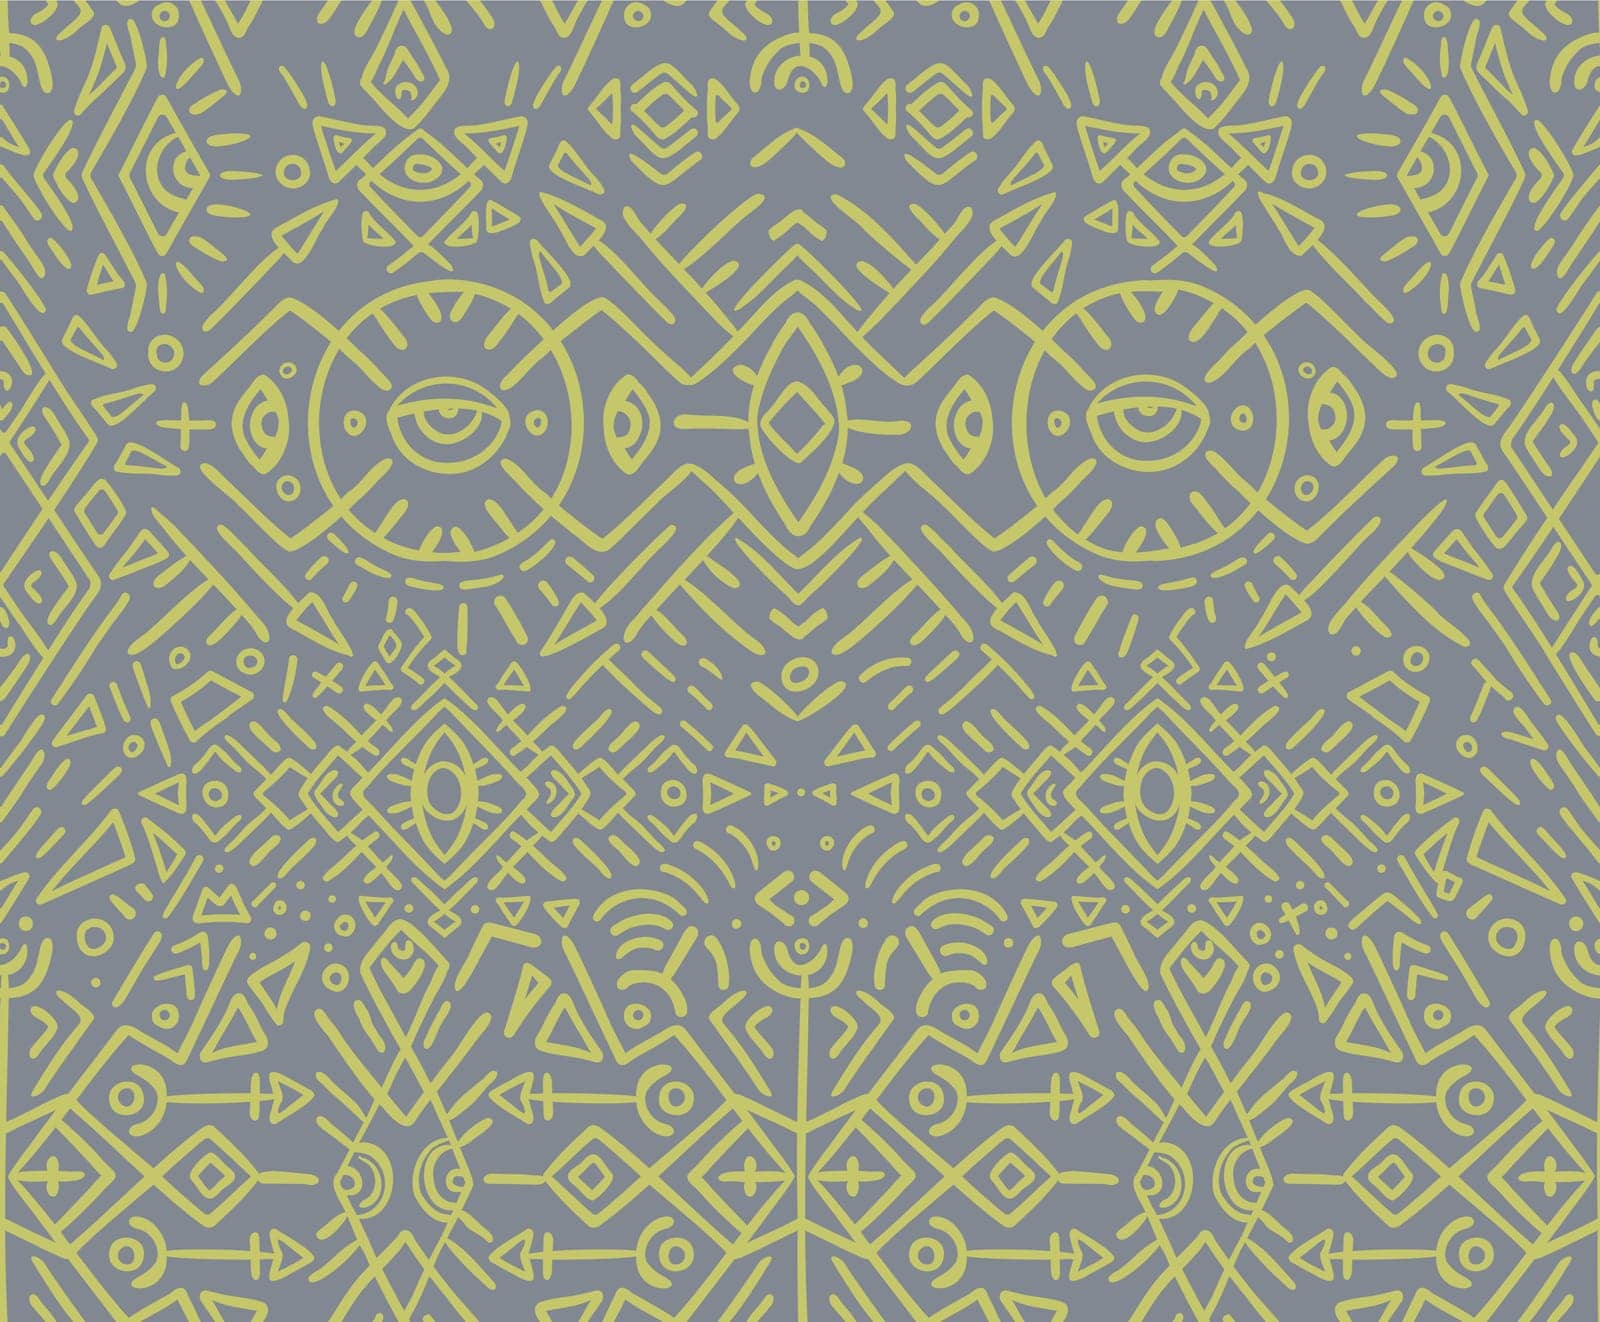 Vector tribal seamless patterns inspired by Indigenous art. Geometric angles and freehand elements create intricate designs. by varka